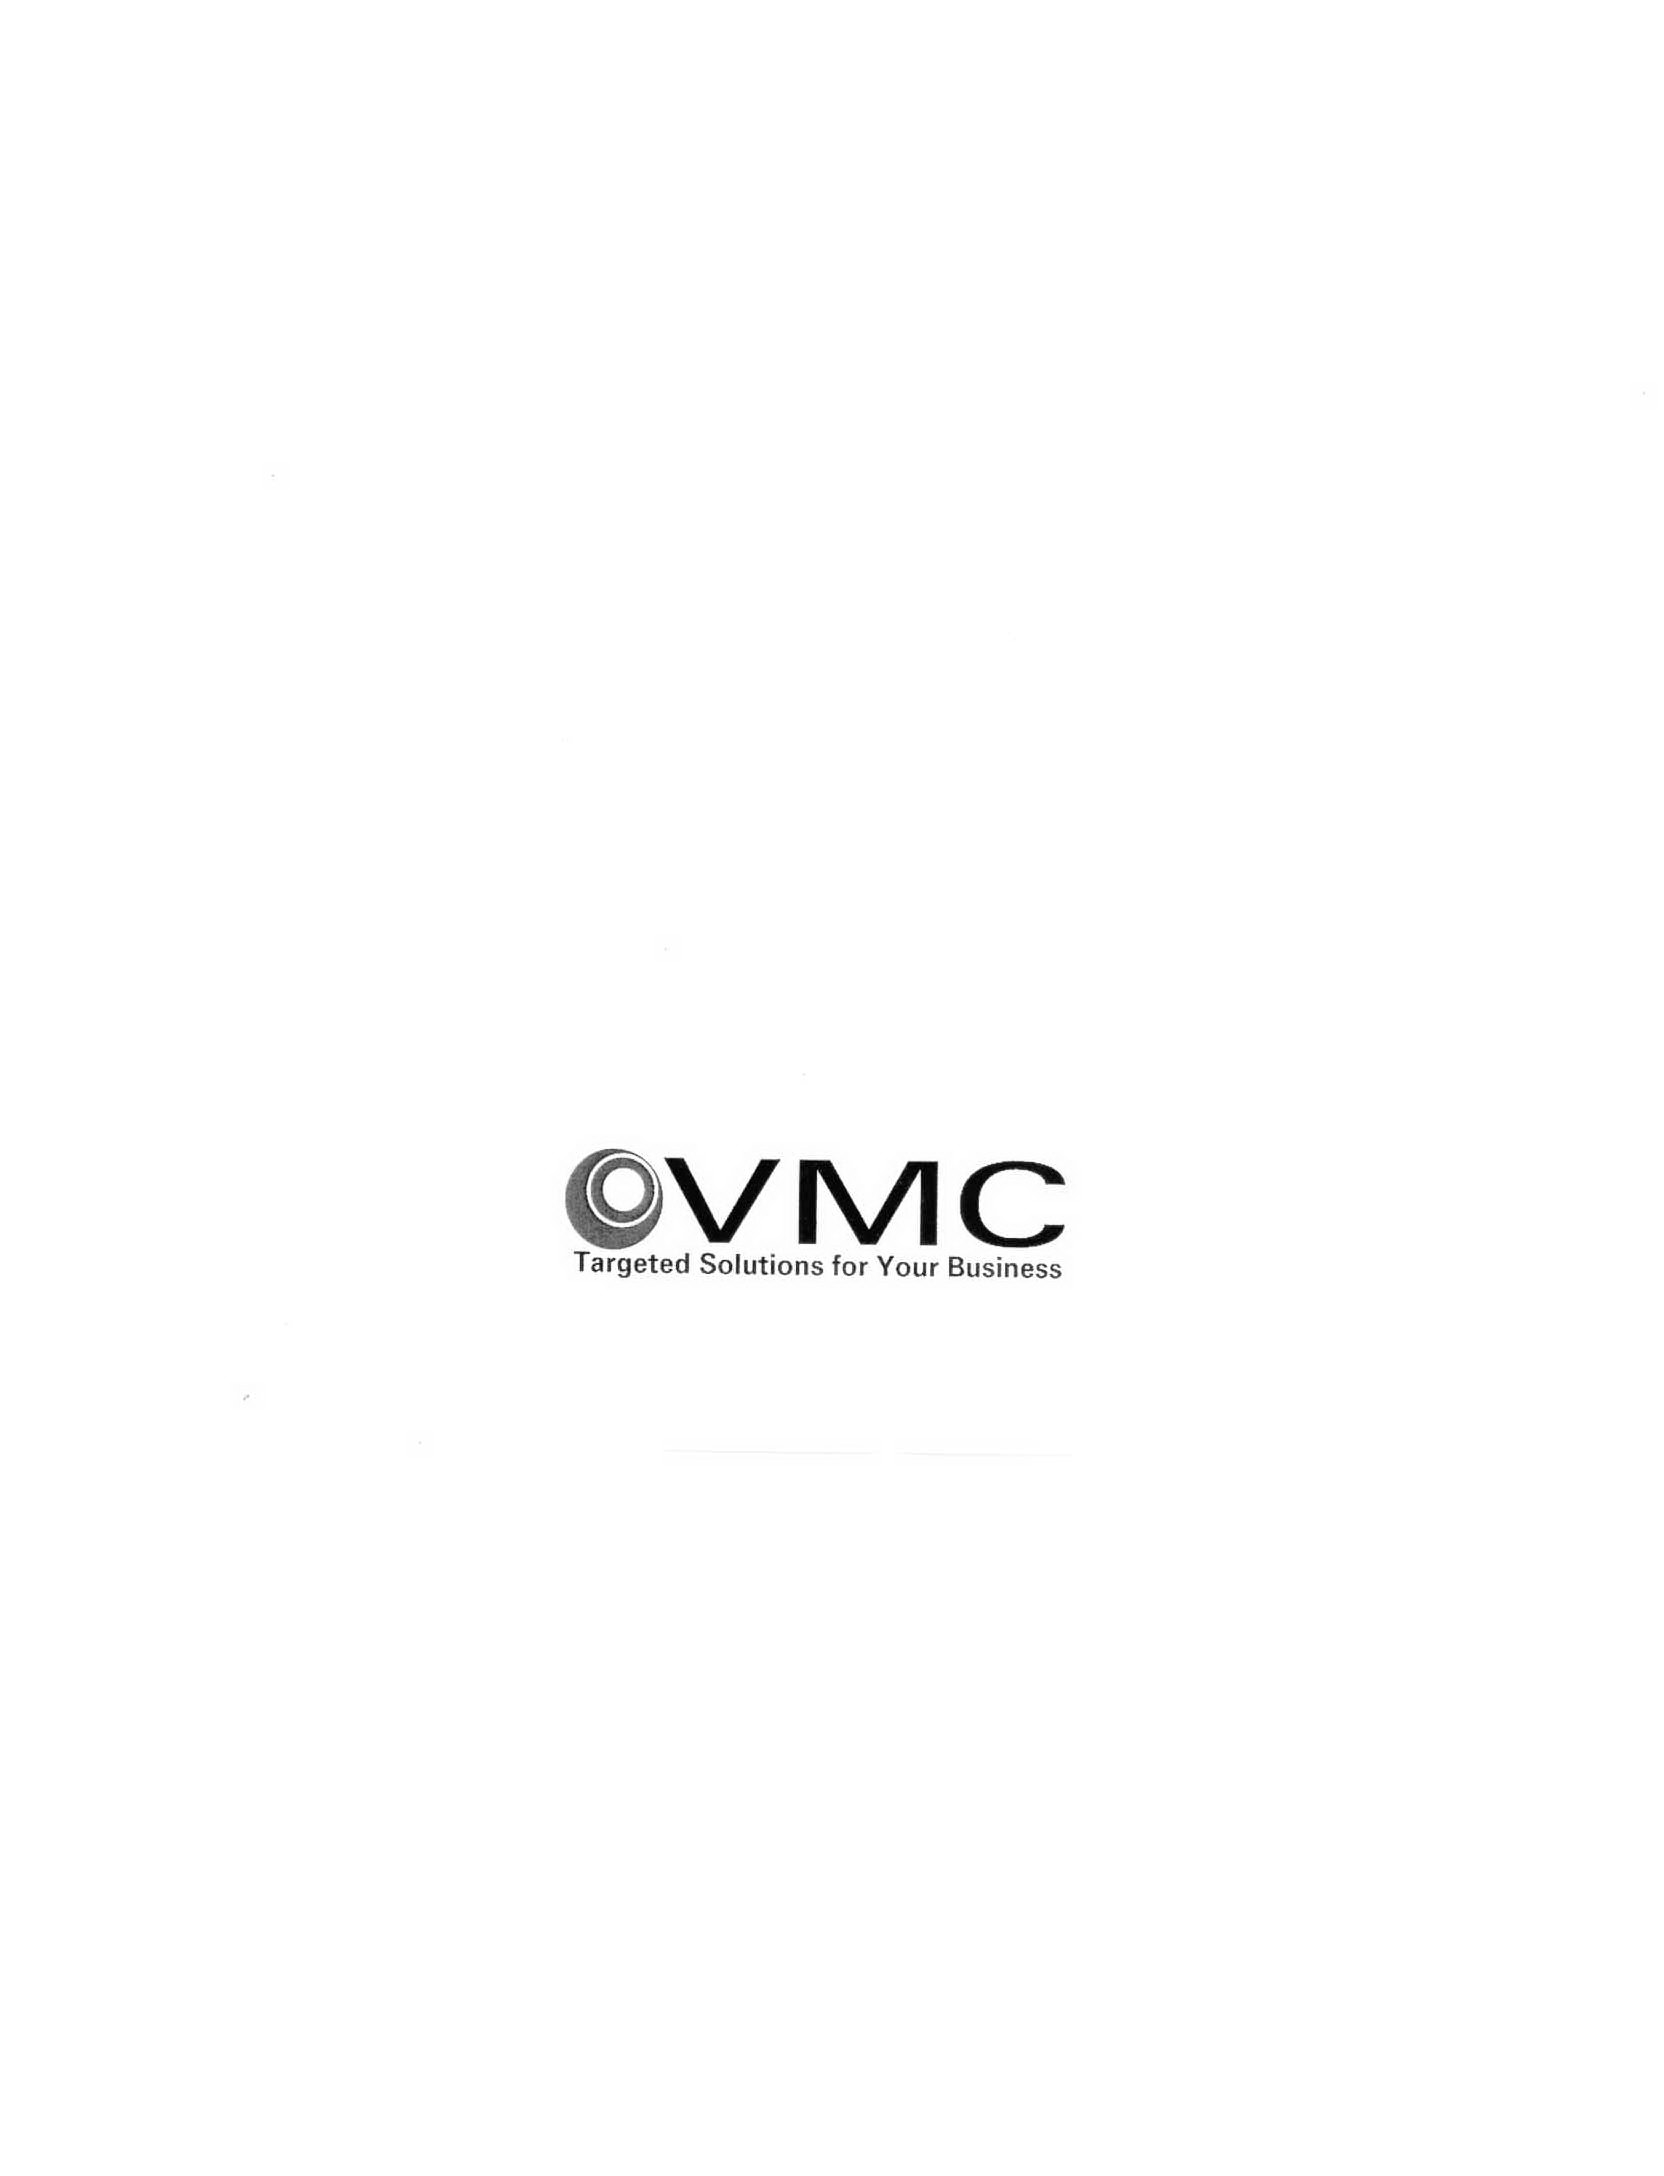  VMC TARGETED SOLUTIONS FOR YOUR BUSINESS